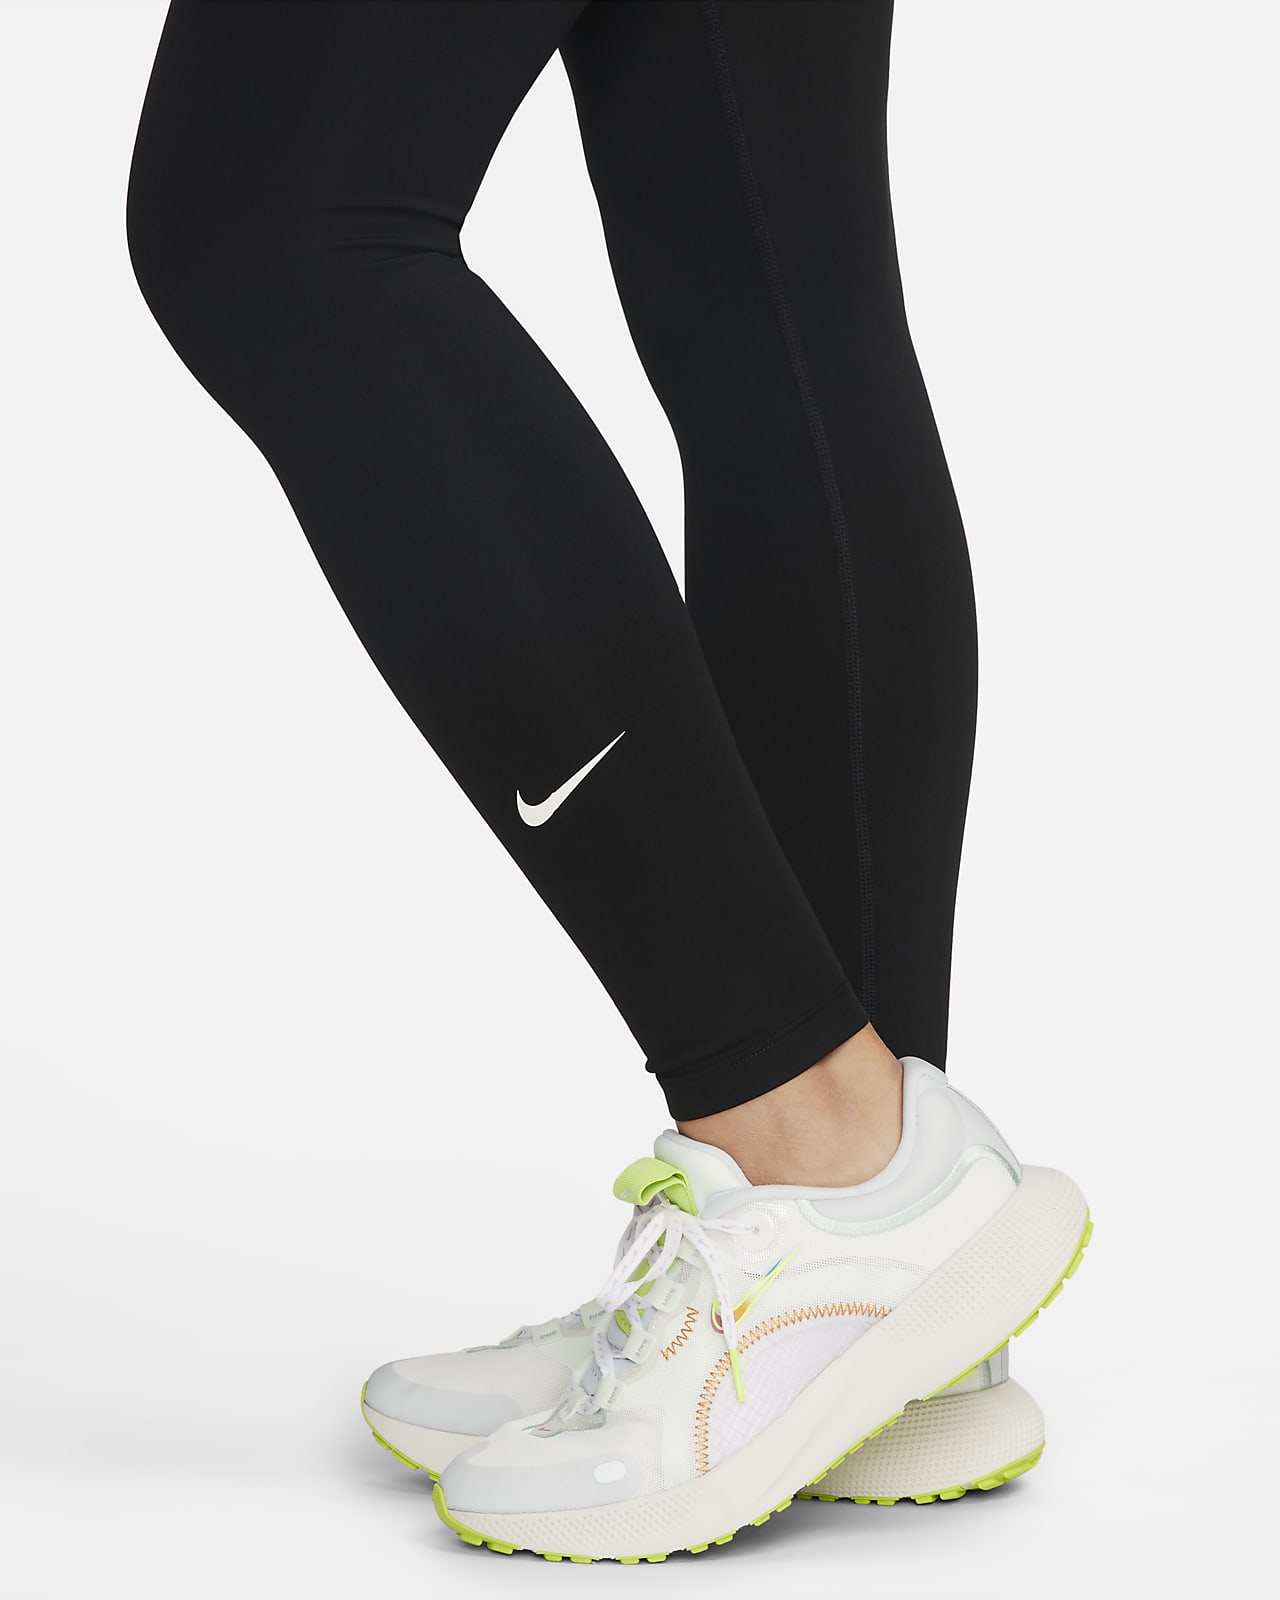 SteP MALL ONLINE SHOP / NIKE 2021 M NK CHLGR MOBILITY TIGHT ＜ブラック＞ (CZ8831- 010) 【23HO】